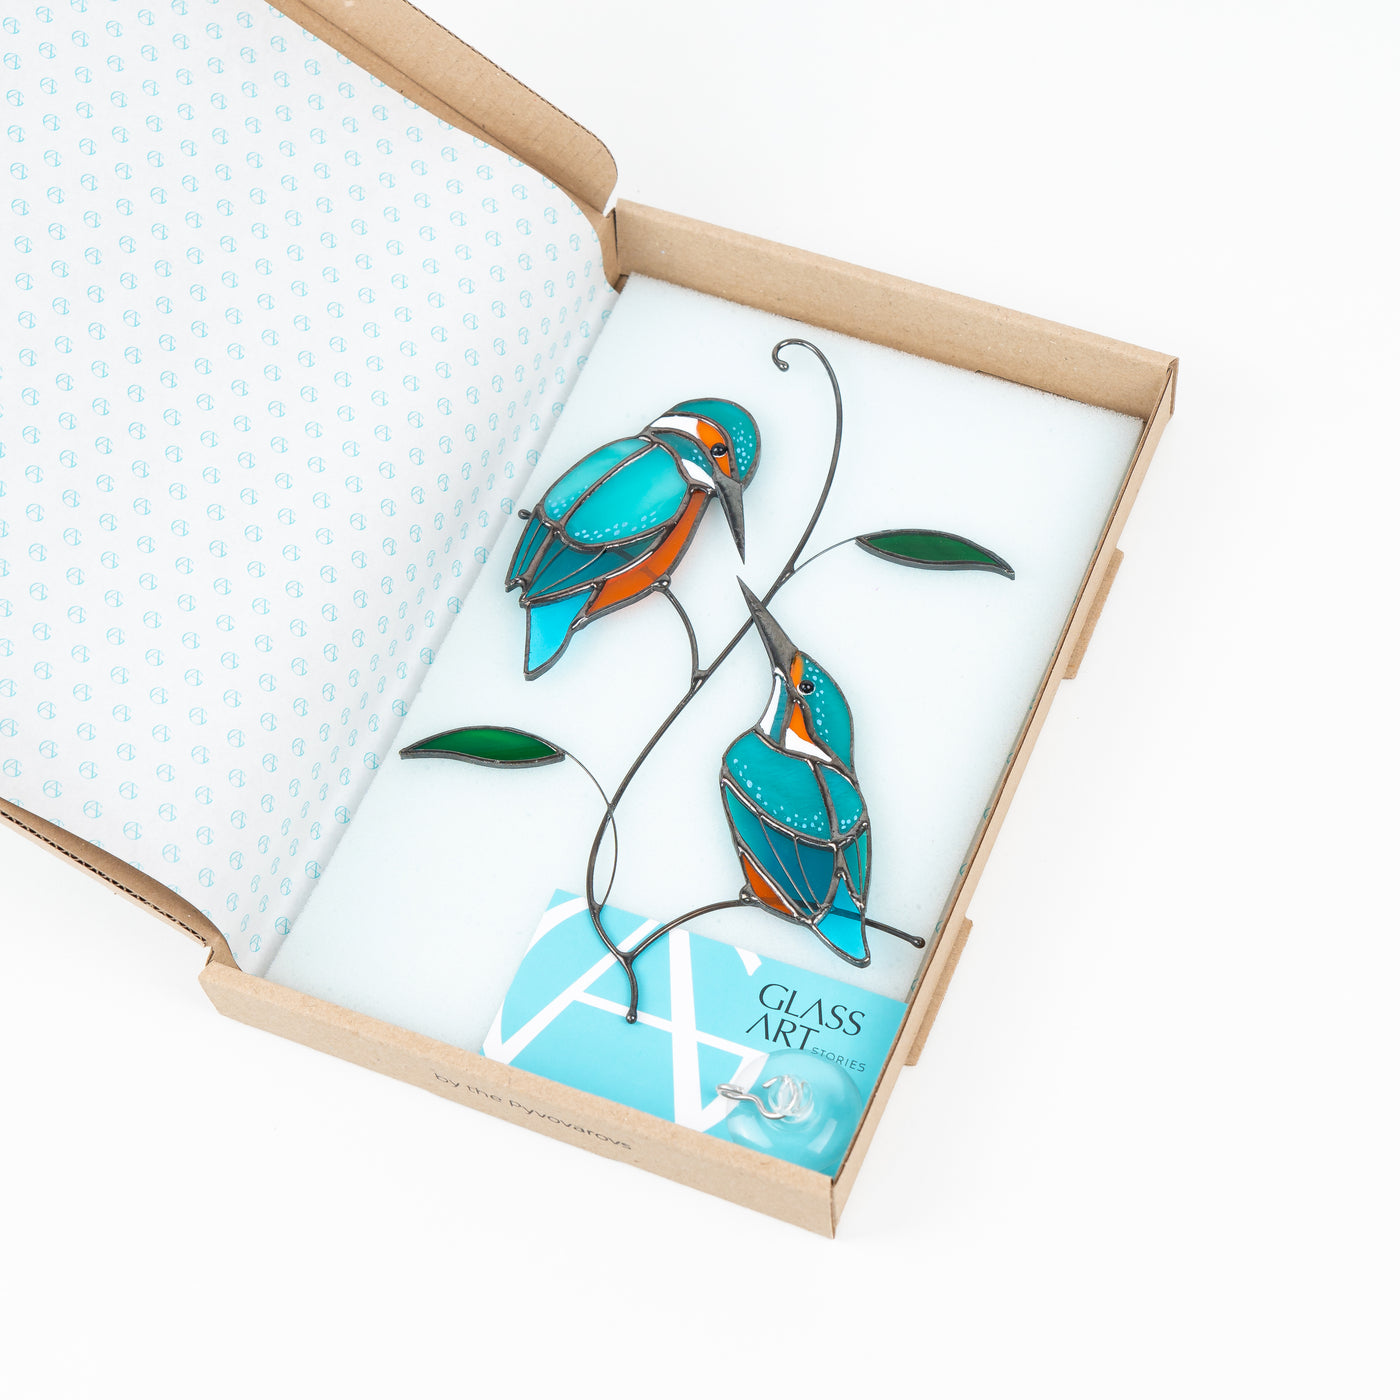 Kingfishers looking at each other suncatcher in a brand box